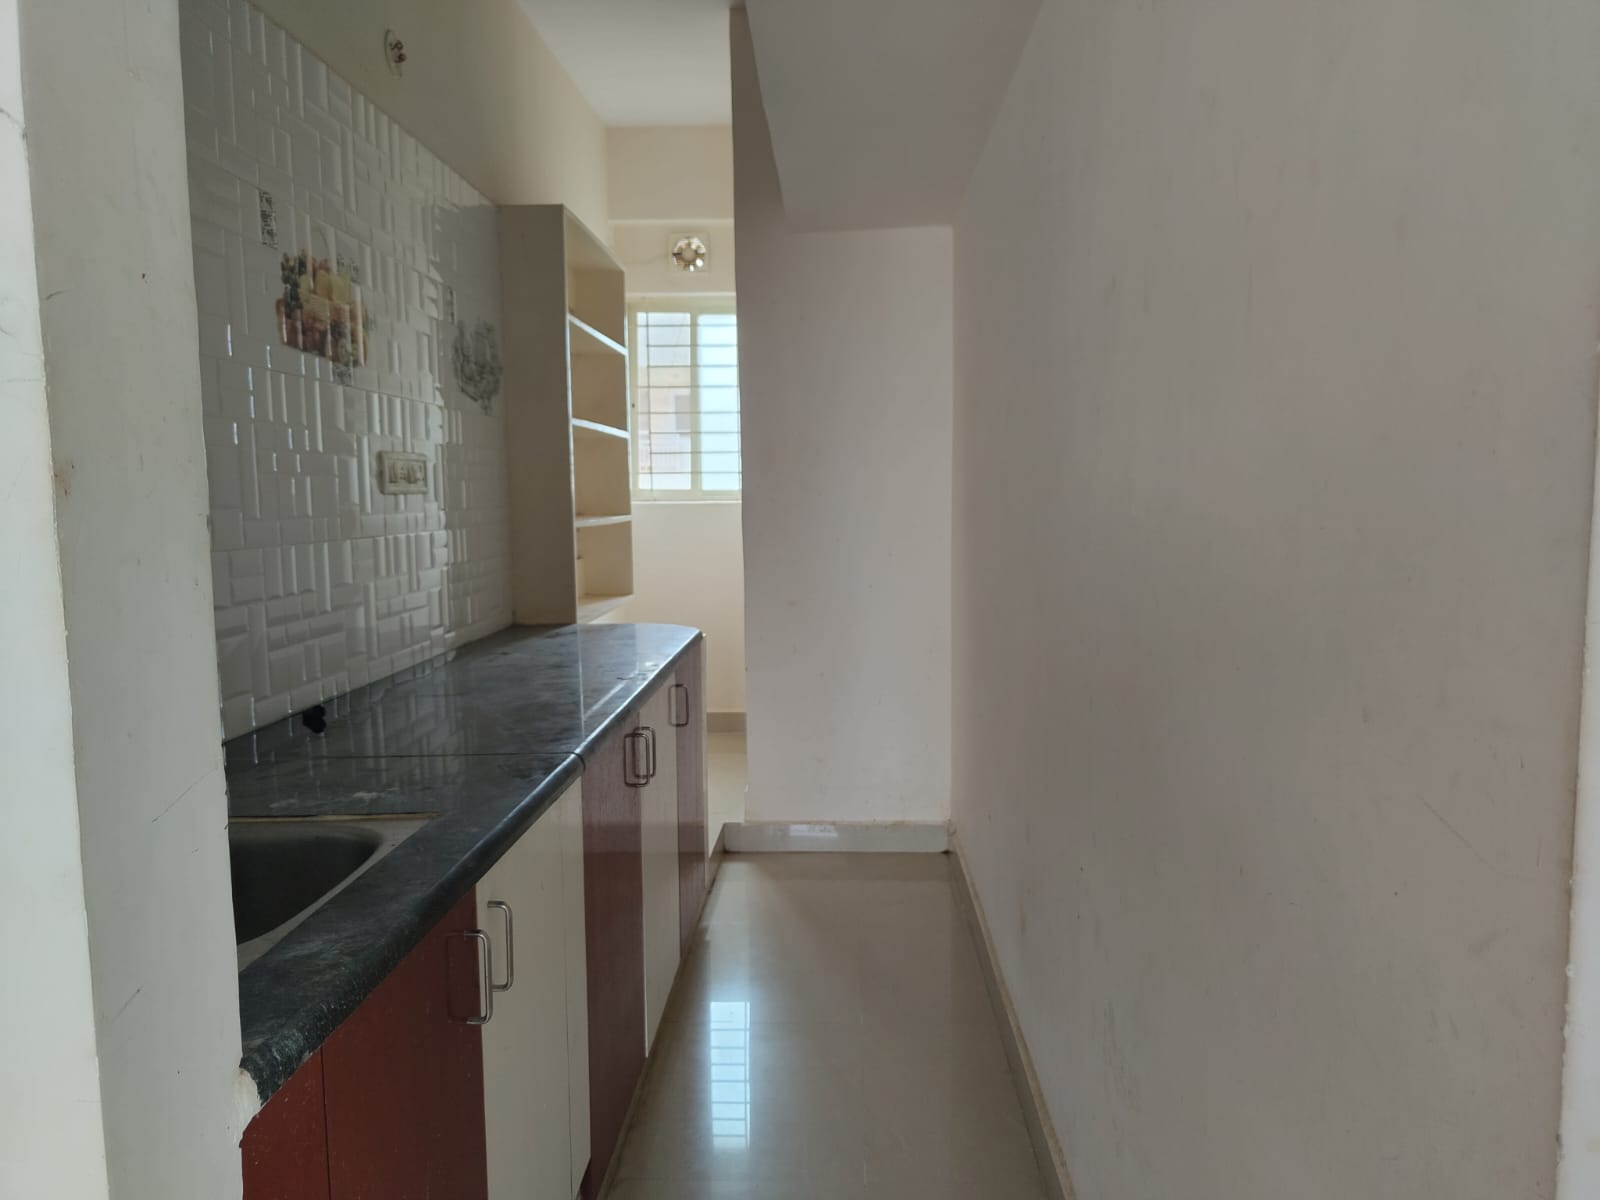 1 BHK Independent House for Lease Only at JAML2 - 4098 in Vishwanathapura